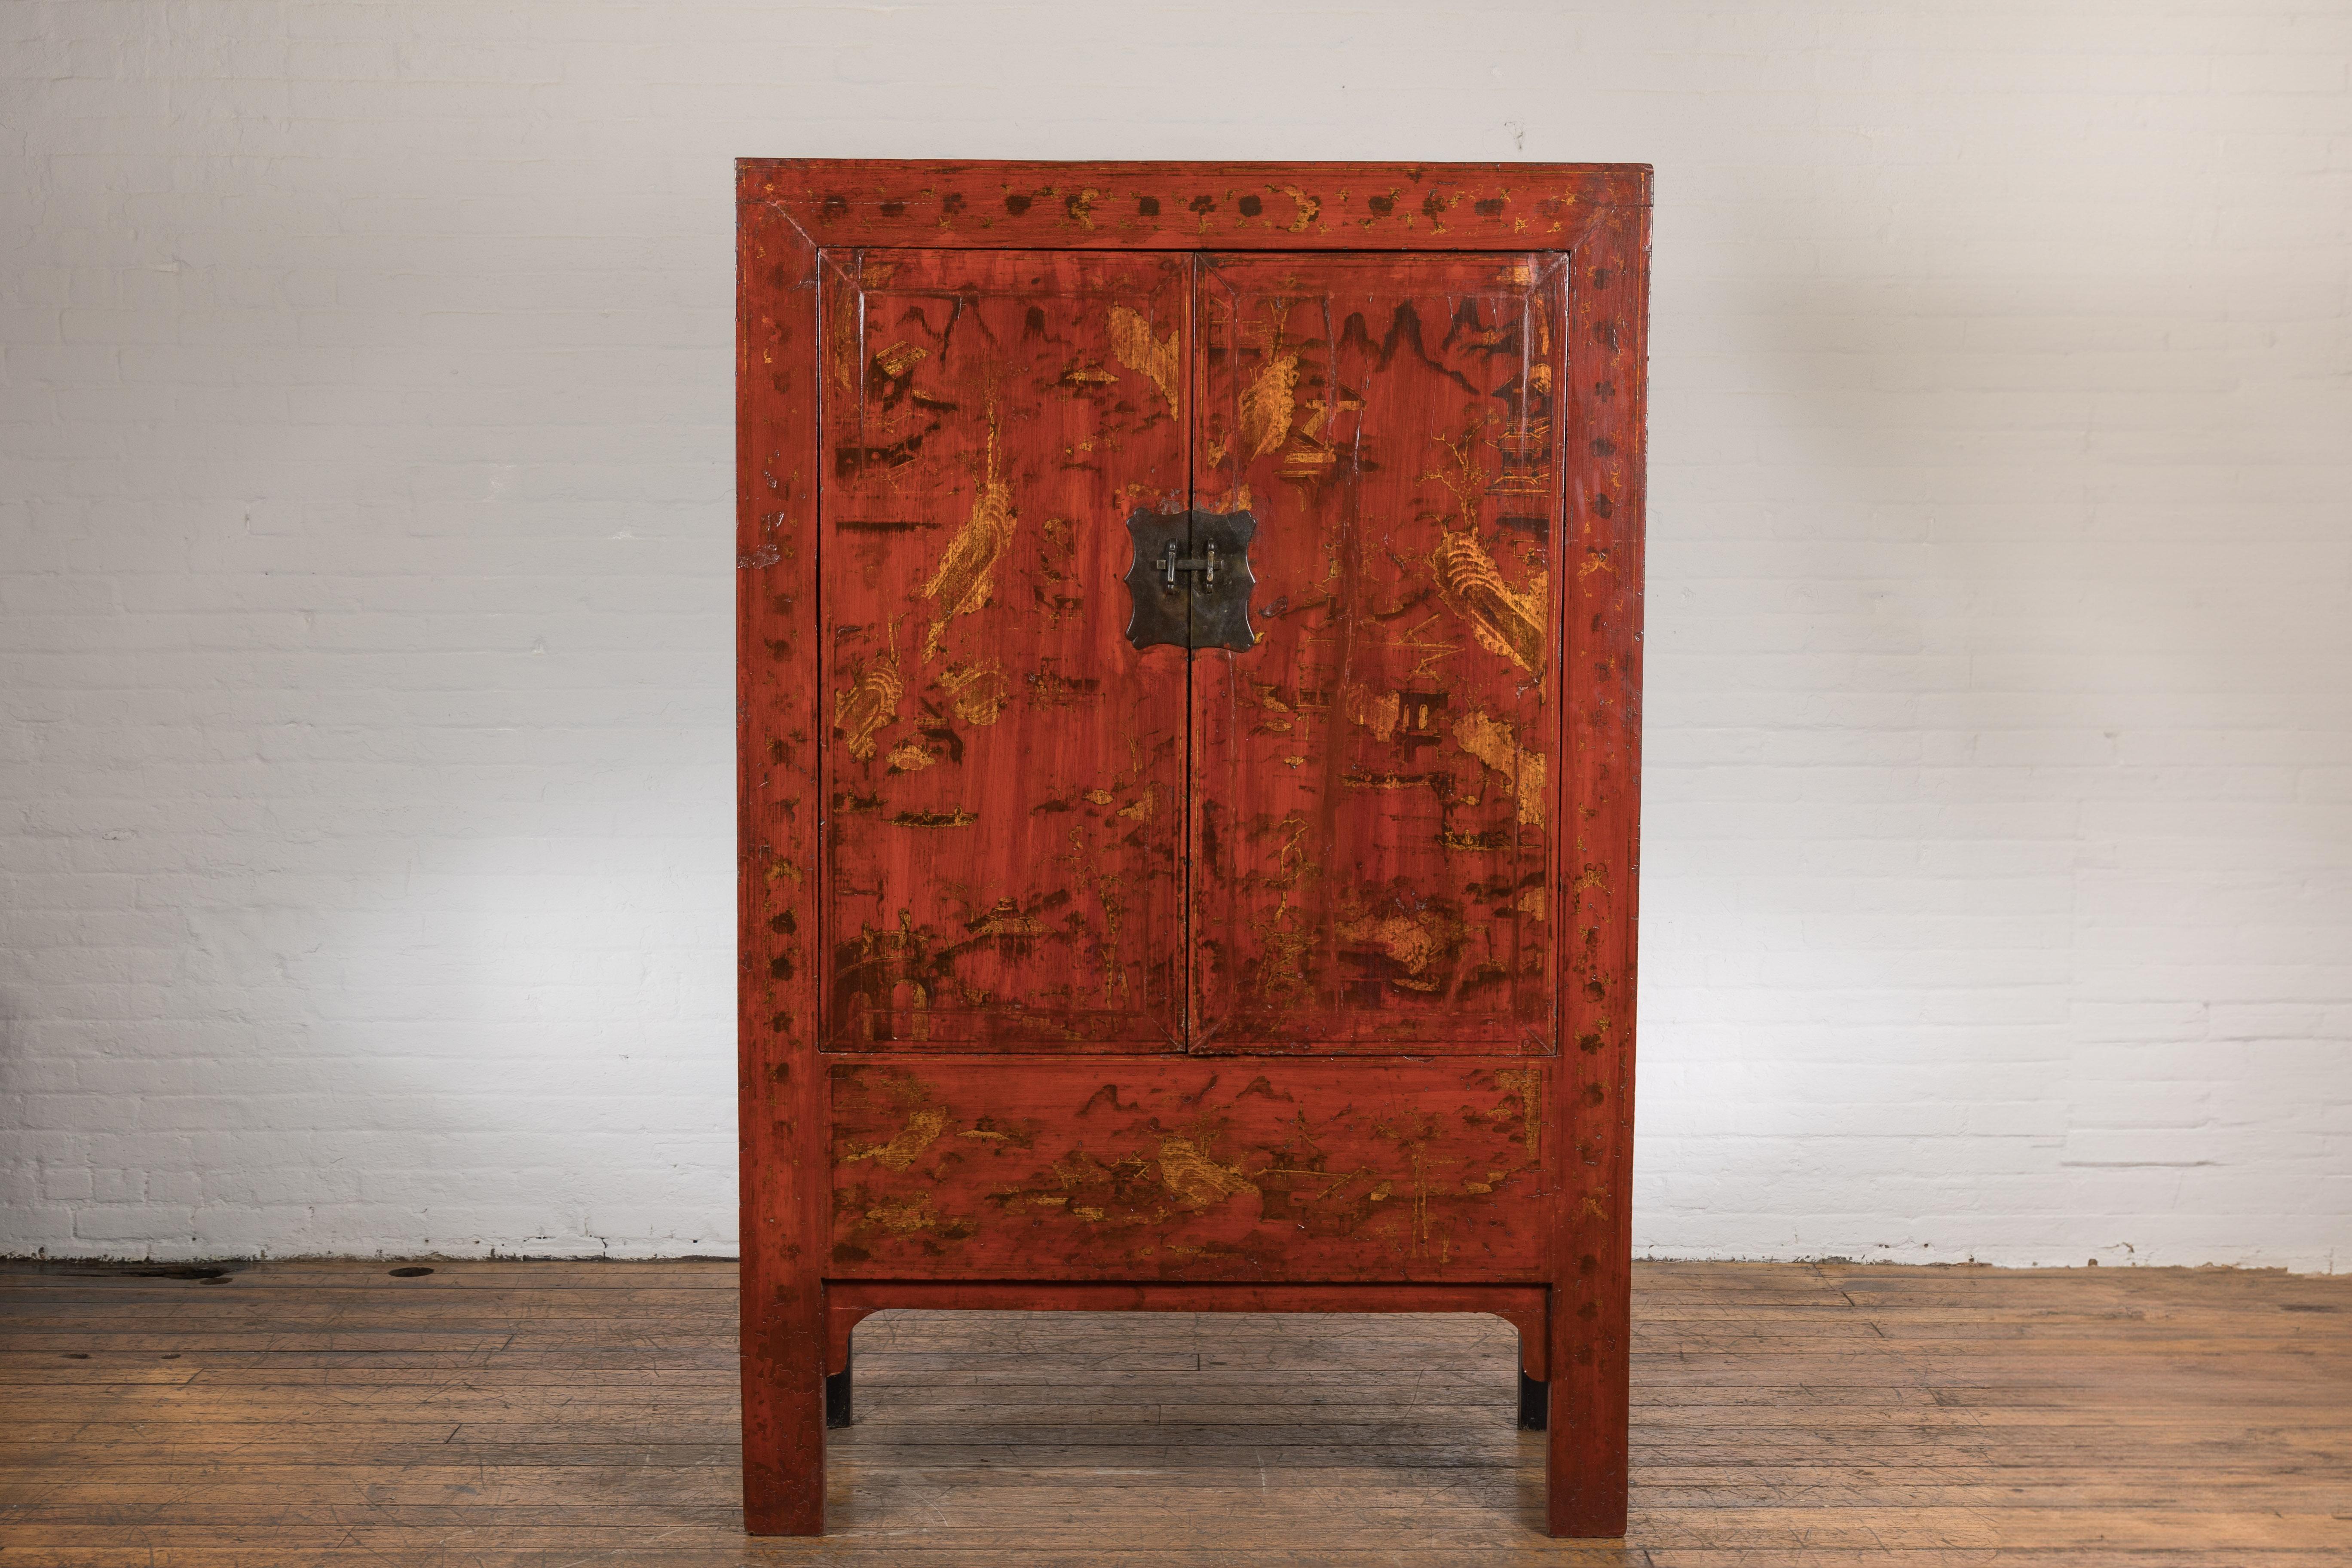 A Chinese Qing Dynasty period red lacquer cabinet from the 19th century with hand-painted gilded scenes. Gracing us with its oriental opulence, this Chinese Qing Dynasty period red lacquer cabinet, born in the 19th century, is a treasure trove of